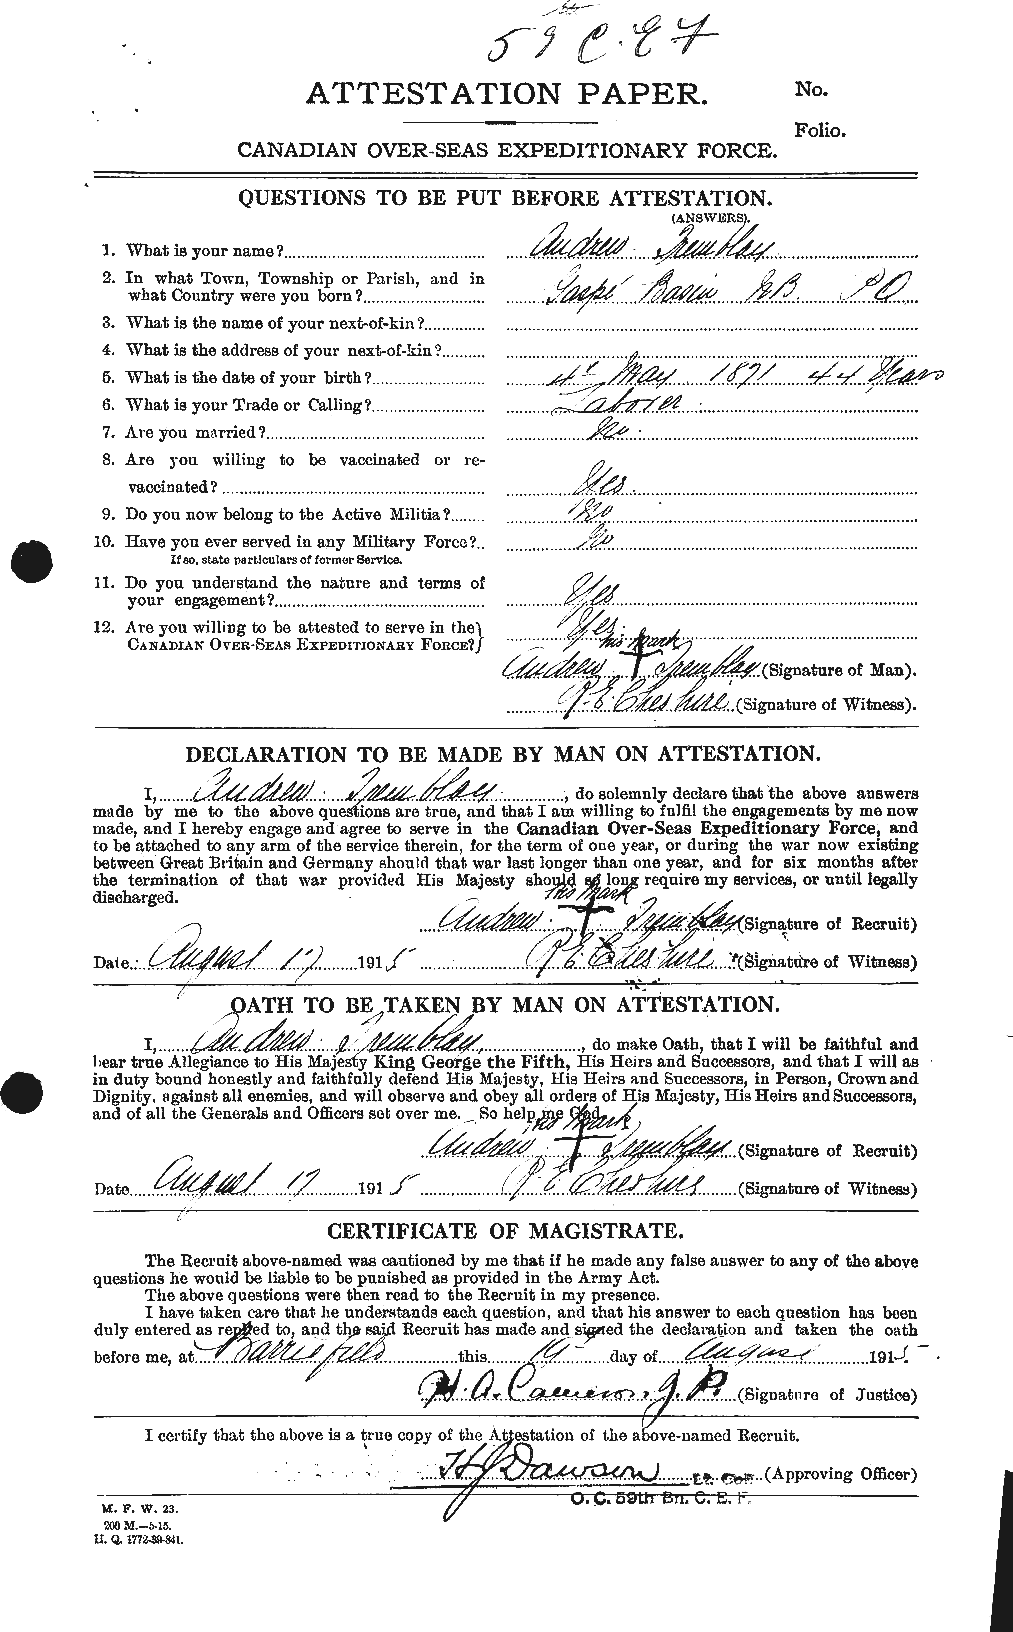 Personnel Records of the First World War - CEF 638942a